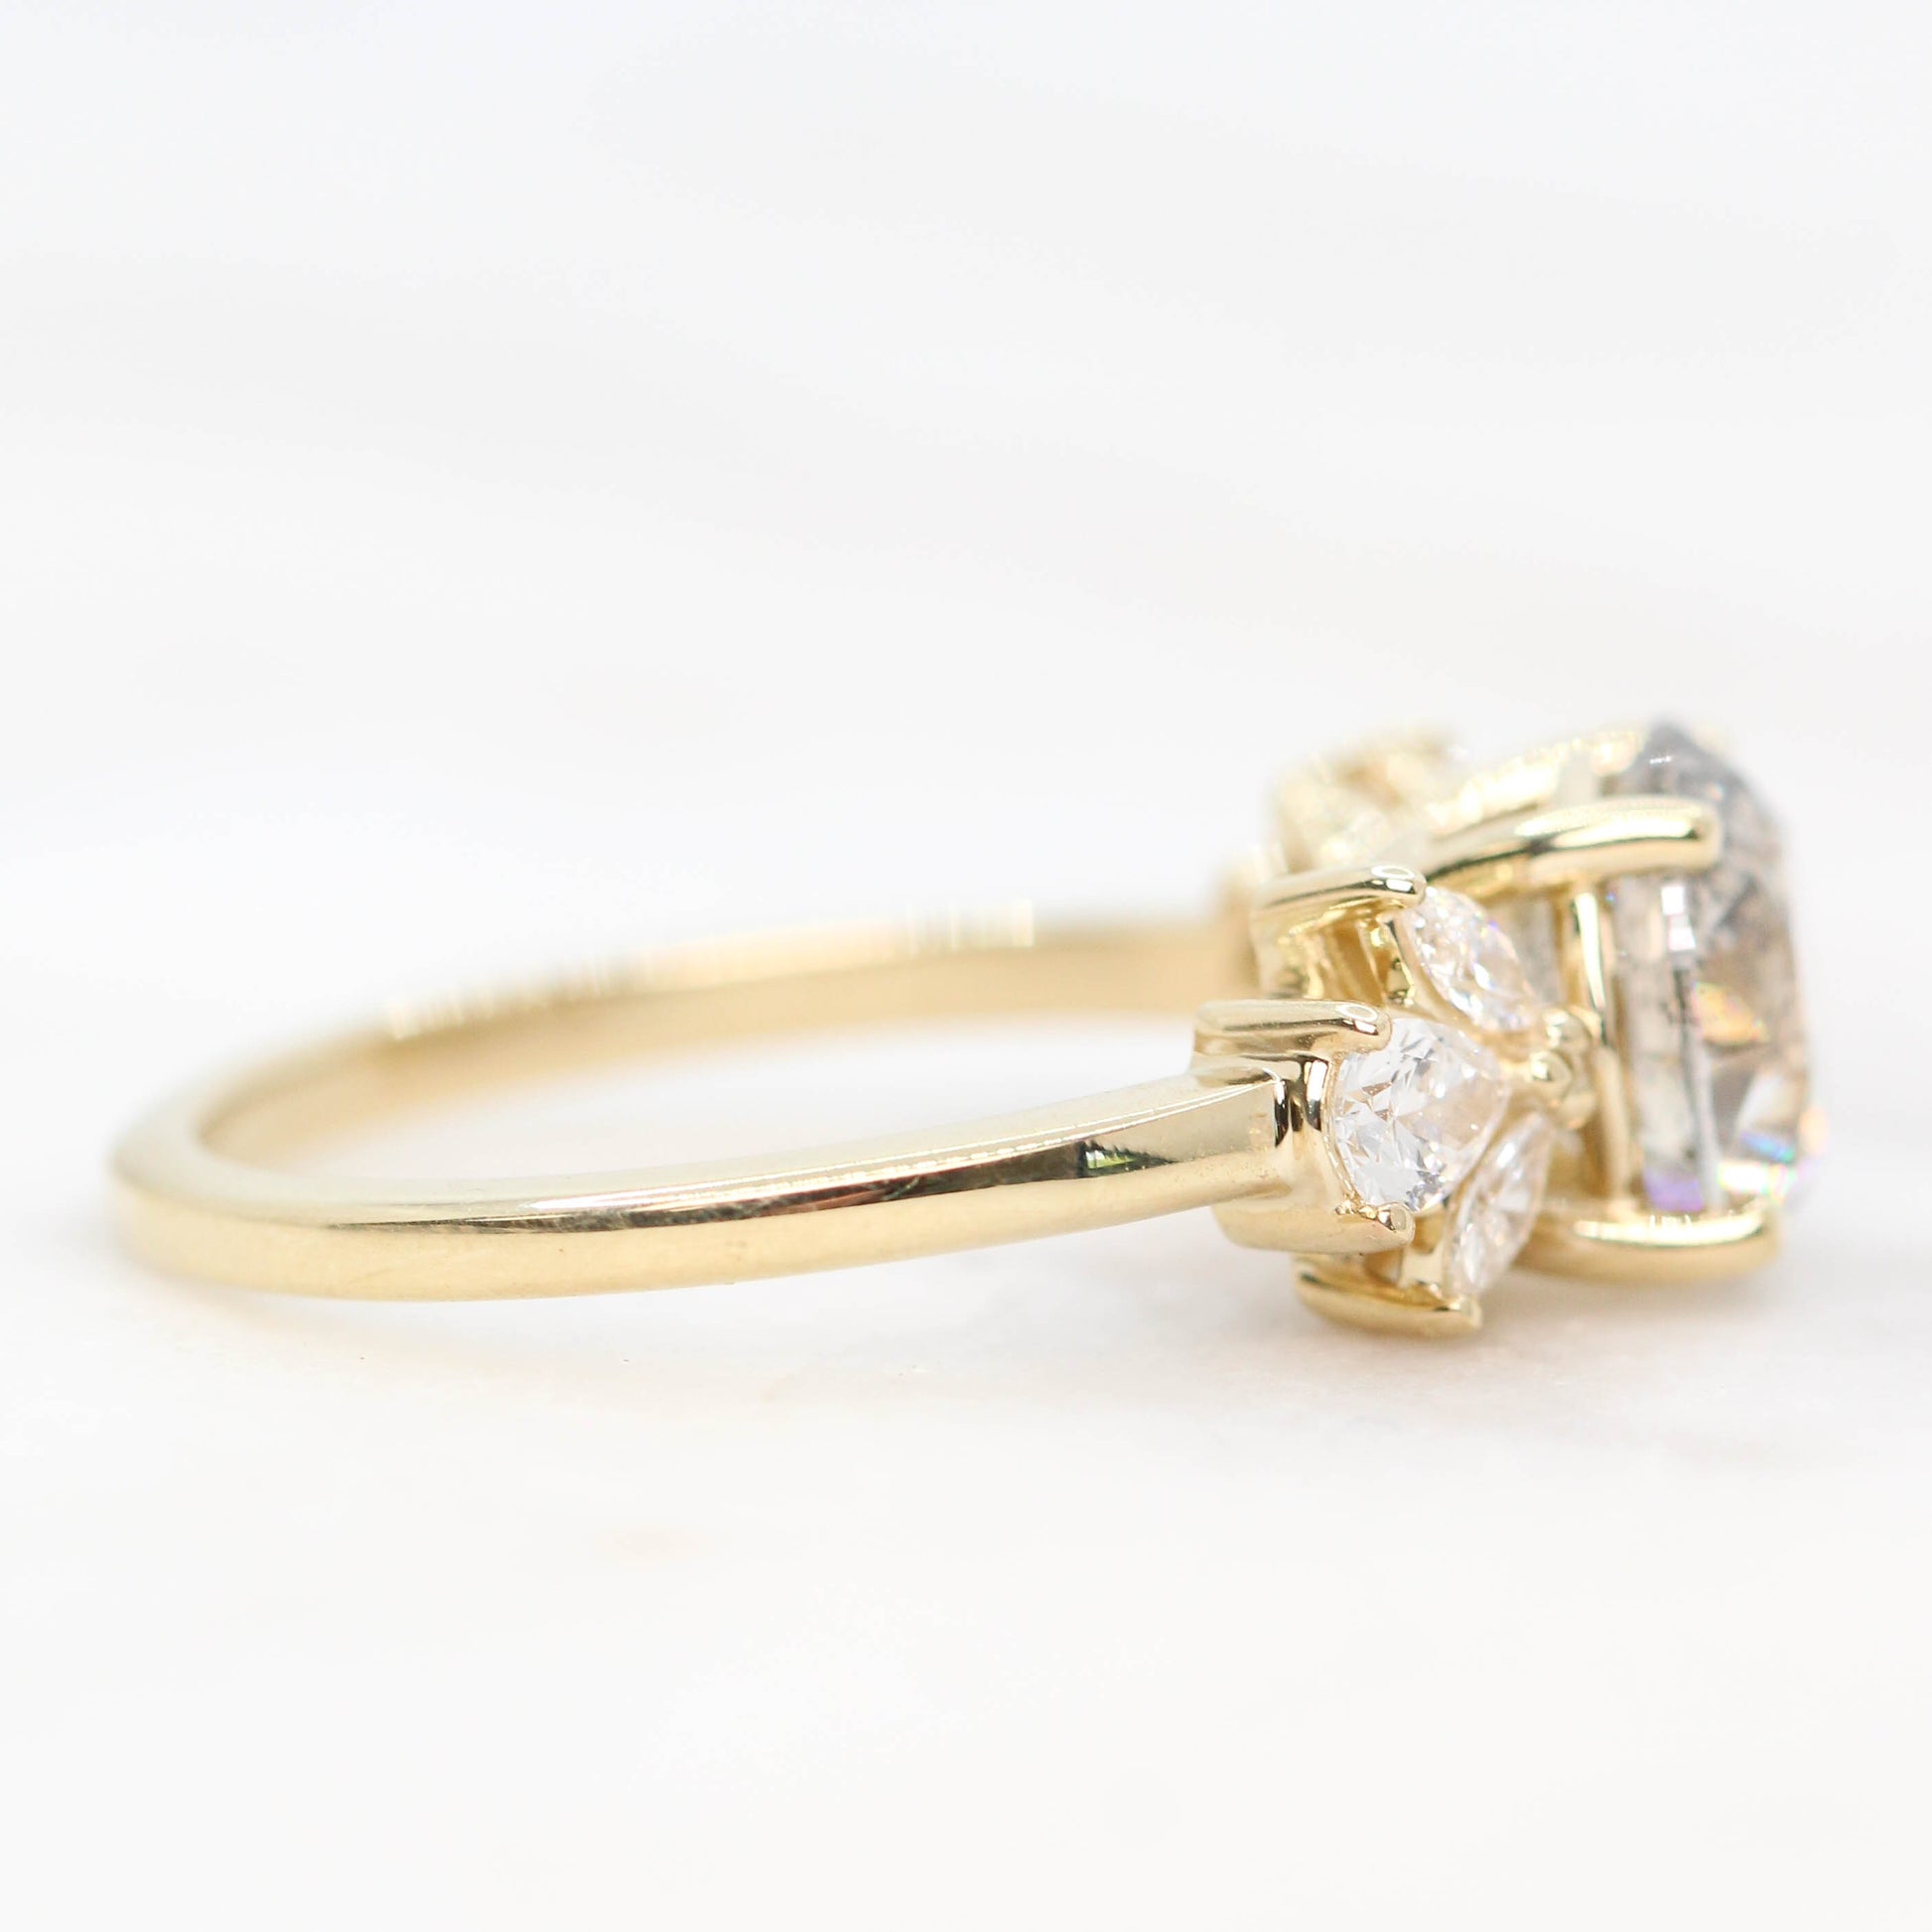 Kendra Ring with a 2.50 Carat Round Champagne Salt and Pepper Diamond and White Accent Diamonds in 14k Yellow Gold - Ready to Size and Ship - Midwinter Co. Alternative Bridal Rings and Modern Fine Jewelry